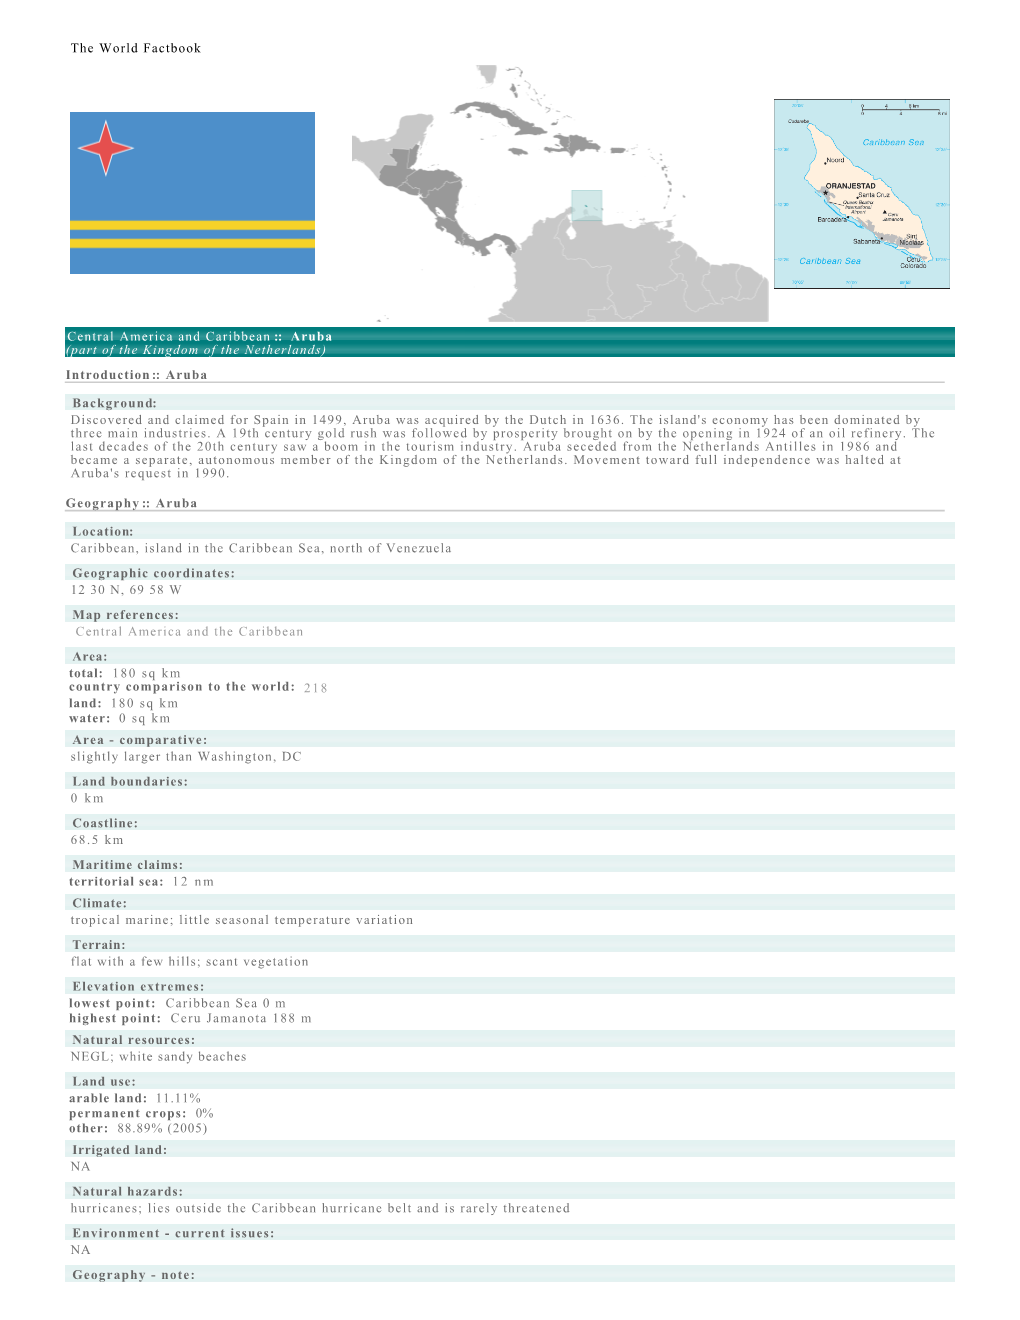 The World Factbook Central America and Caribbean :: Aruba (Part of The